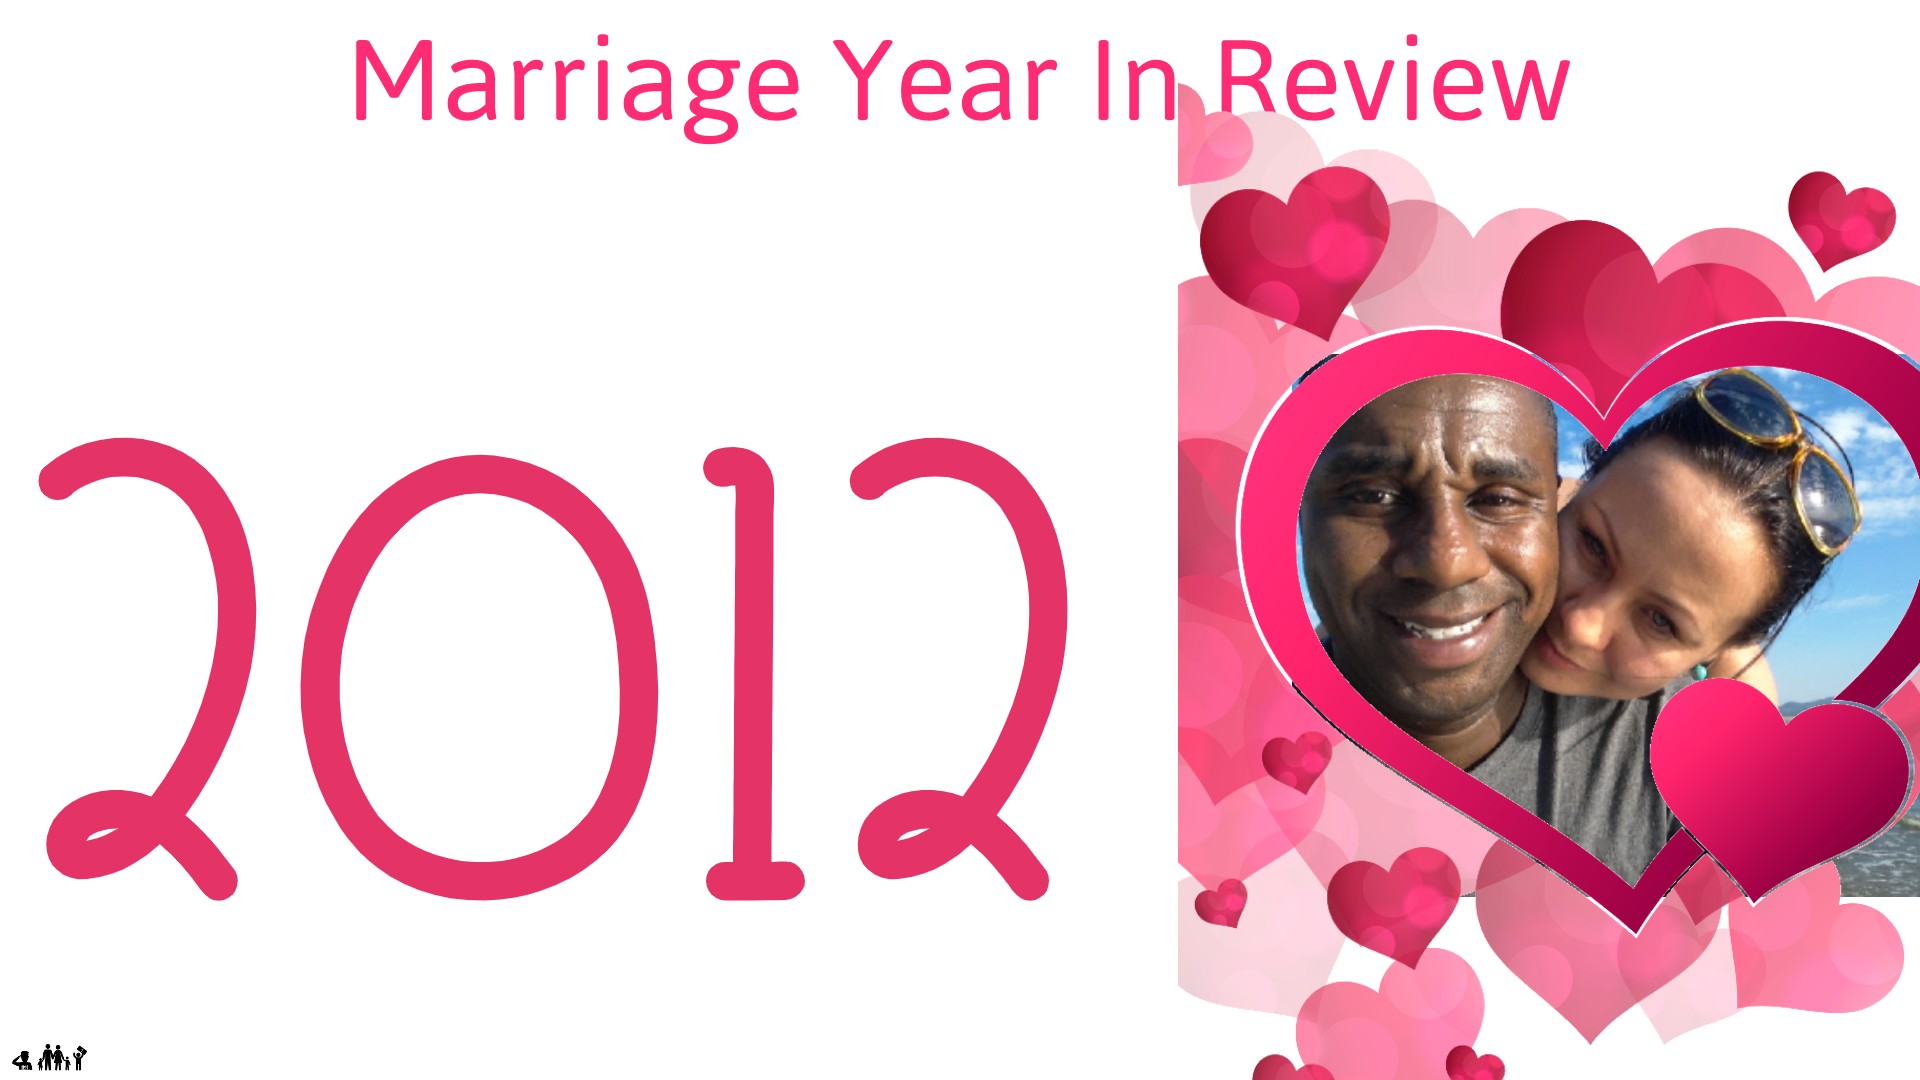 Marriage Year in Review: 2012